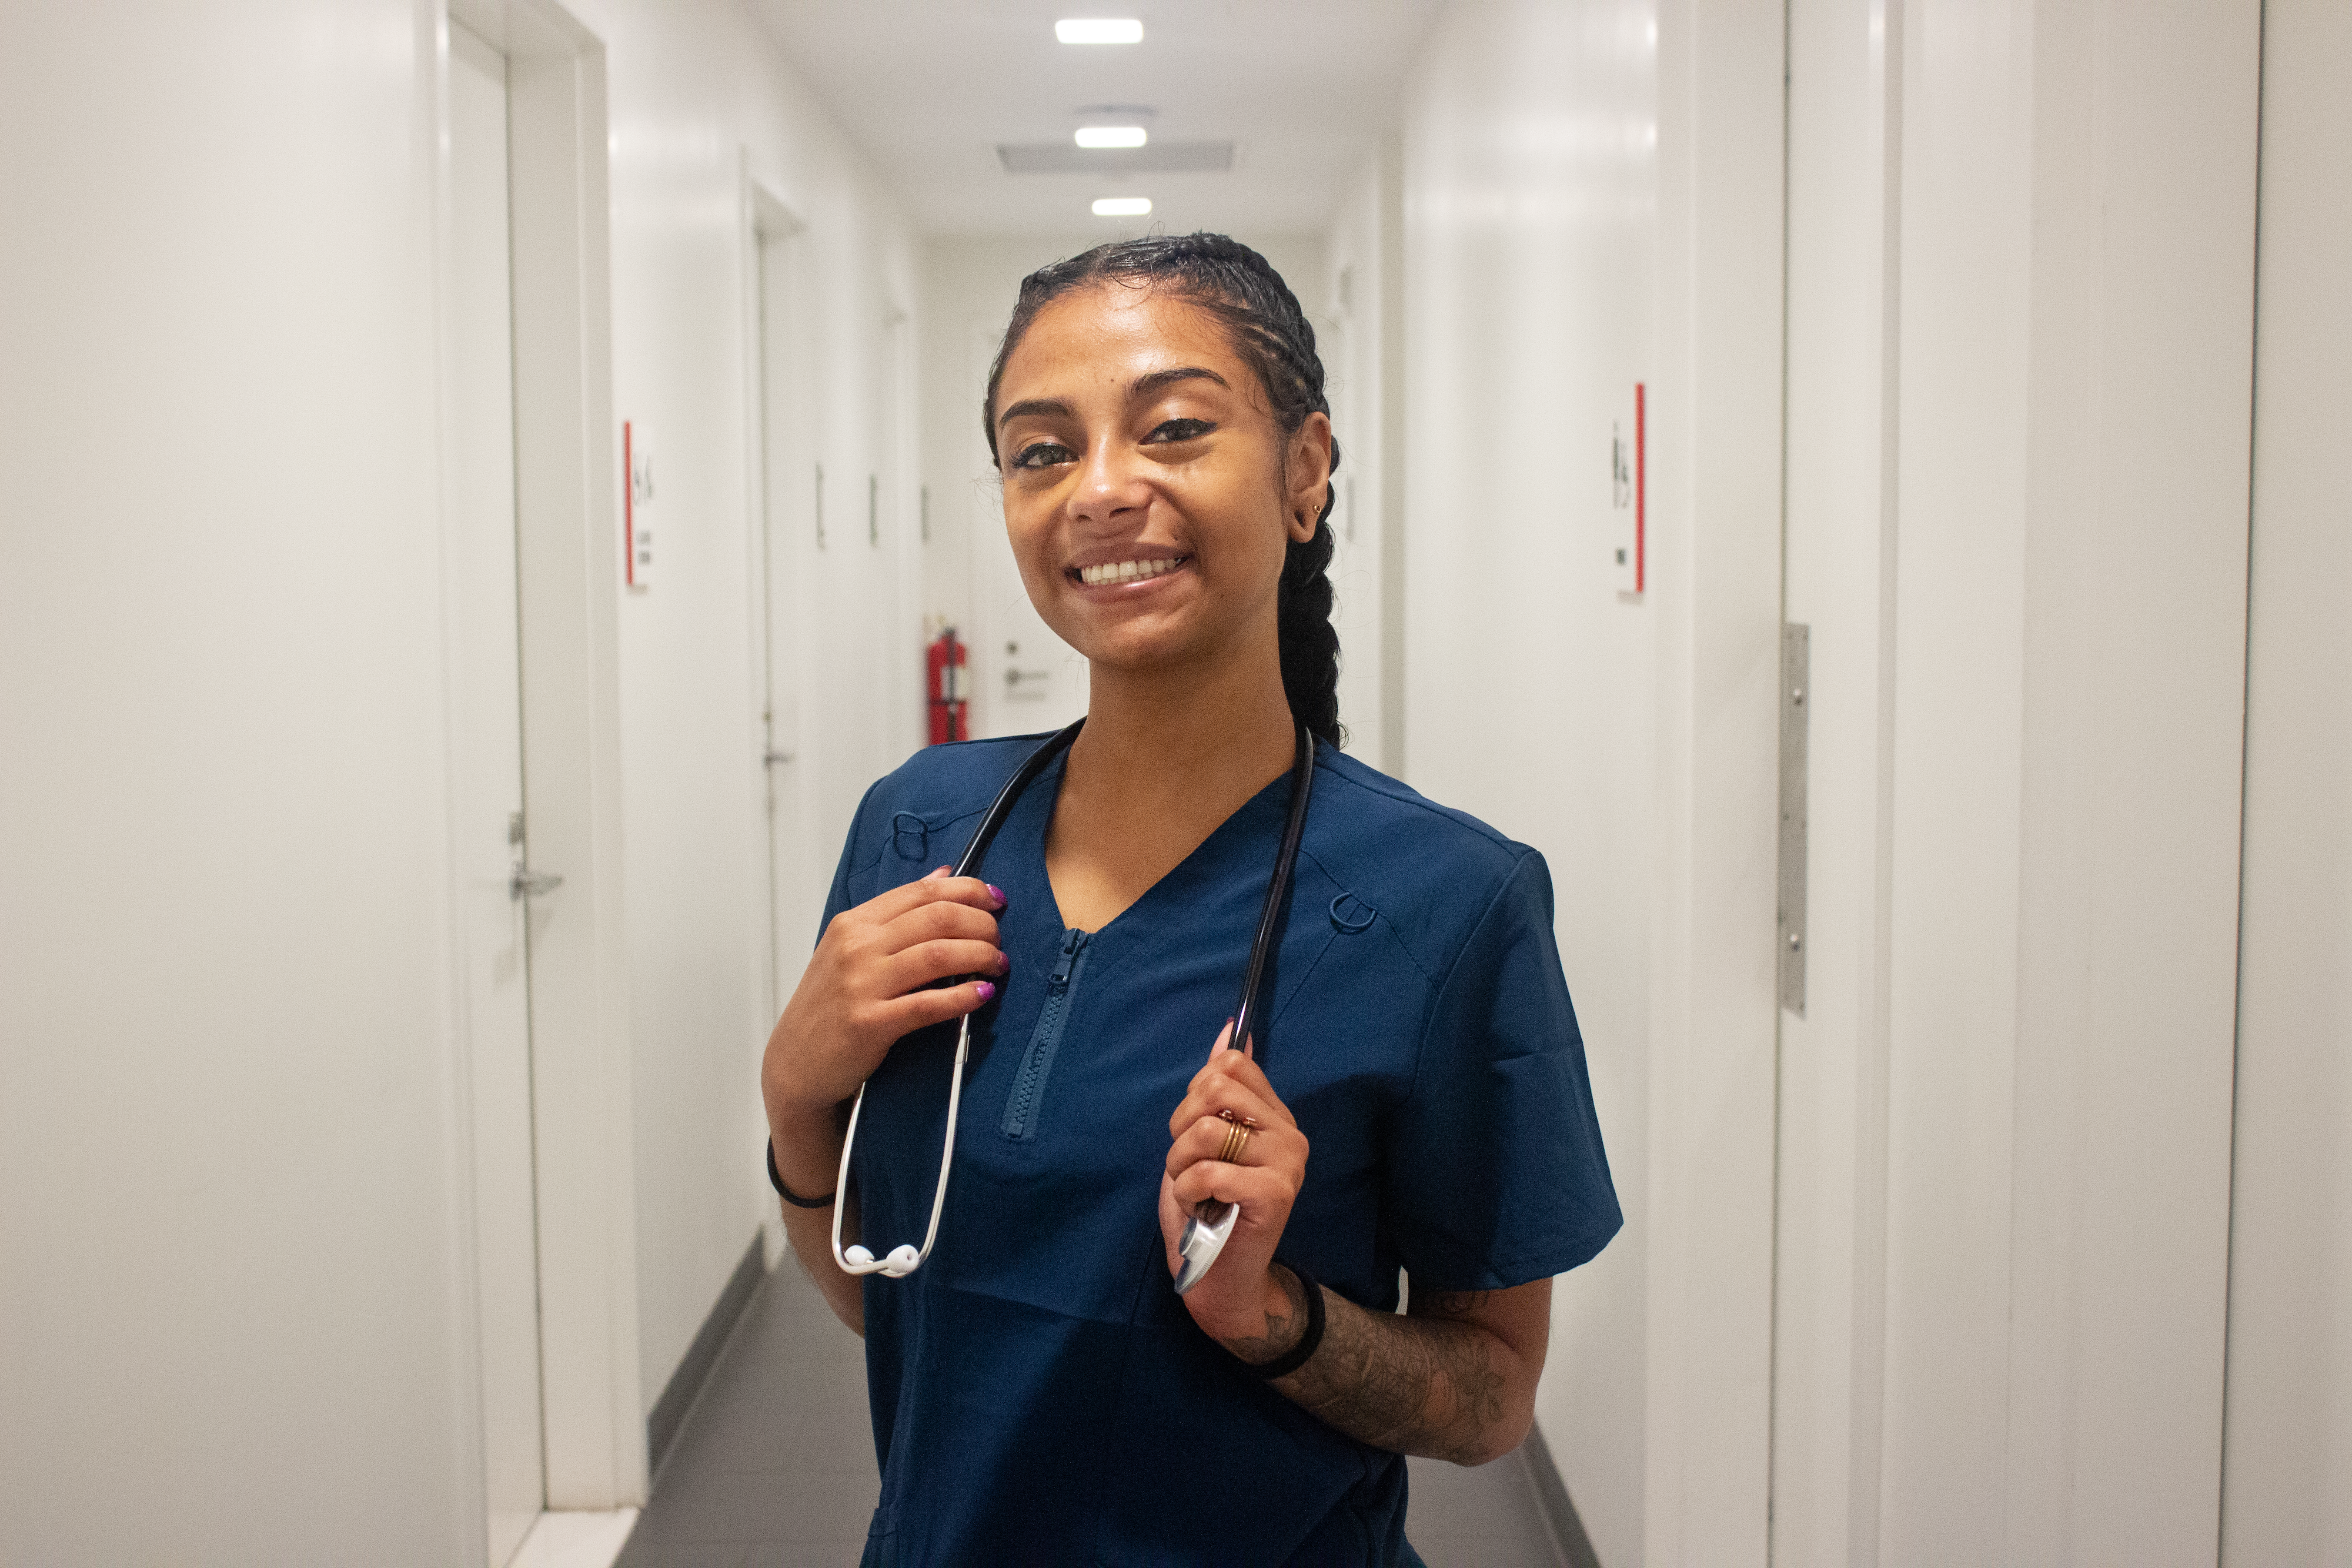 Bianca Pimentel dressed in her work scrubs and holding a stethoscope